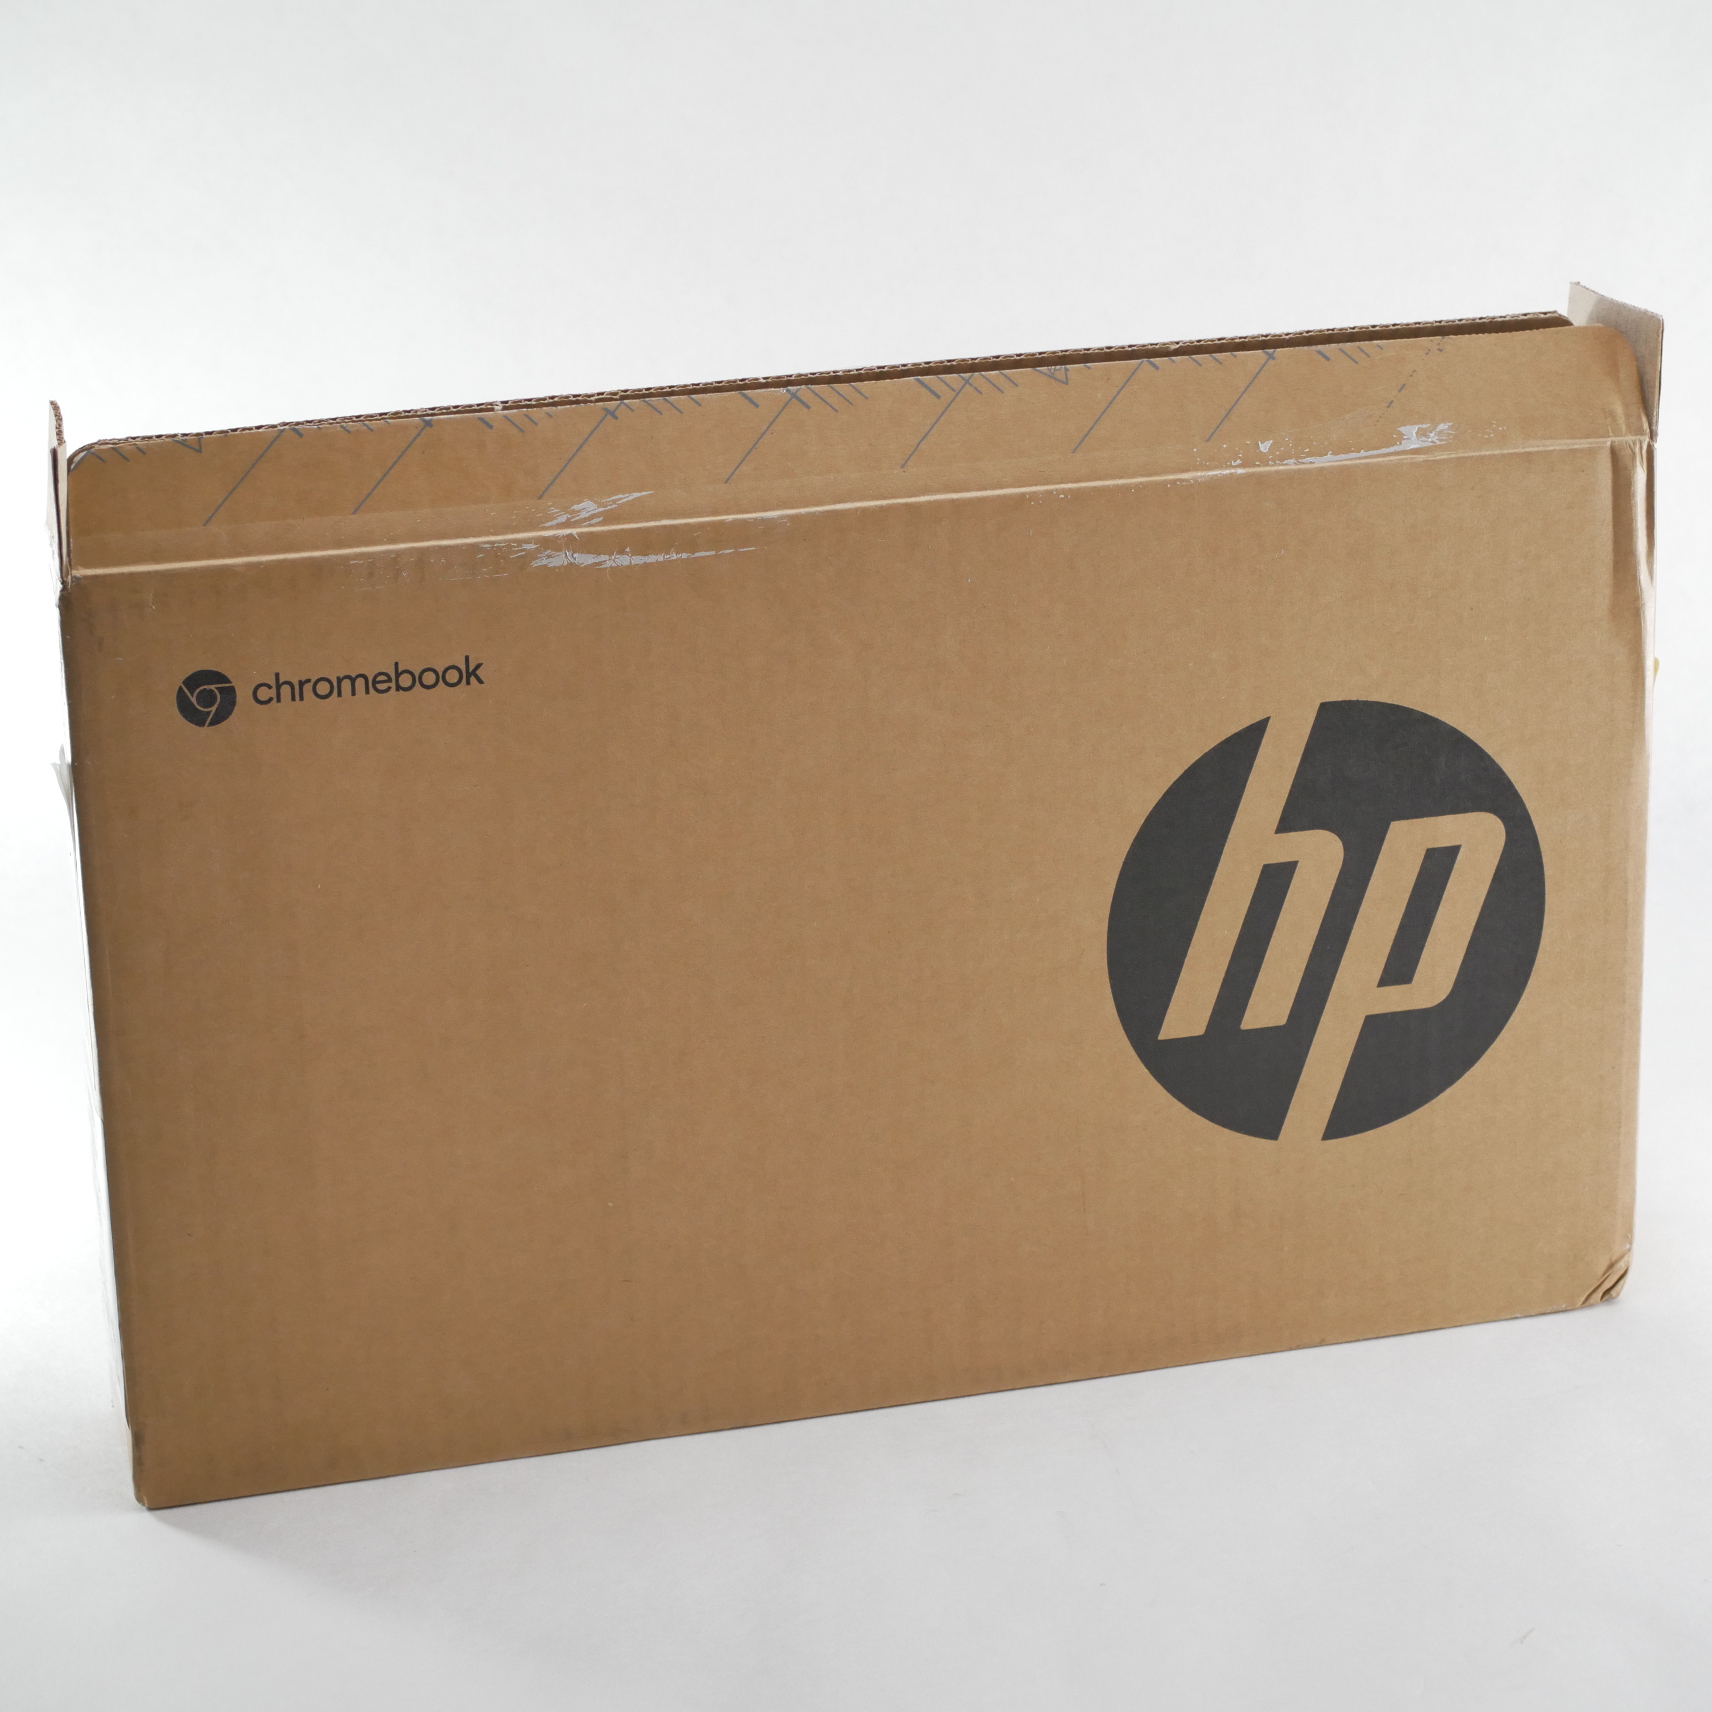 HP Chromebook 11MK G9 Education Edition 11.6" touchscreen MT8183 4Gb / 32Gb - Click Image to Close